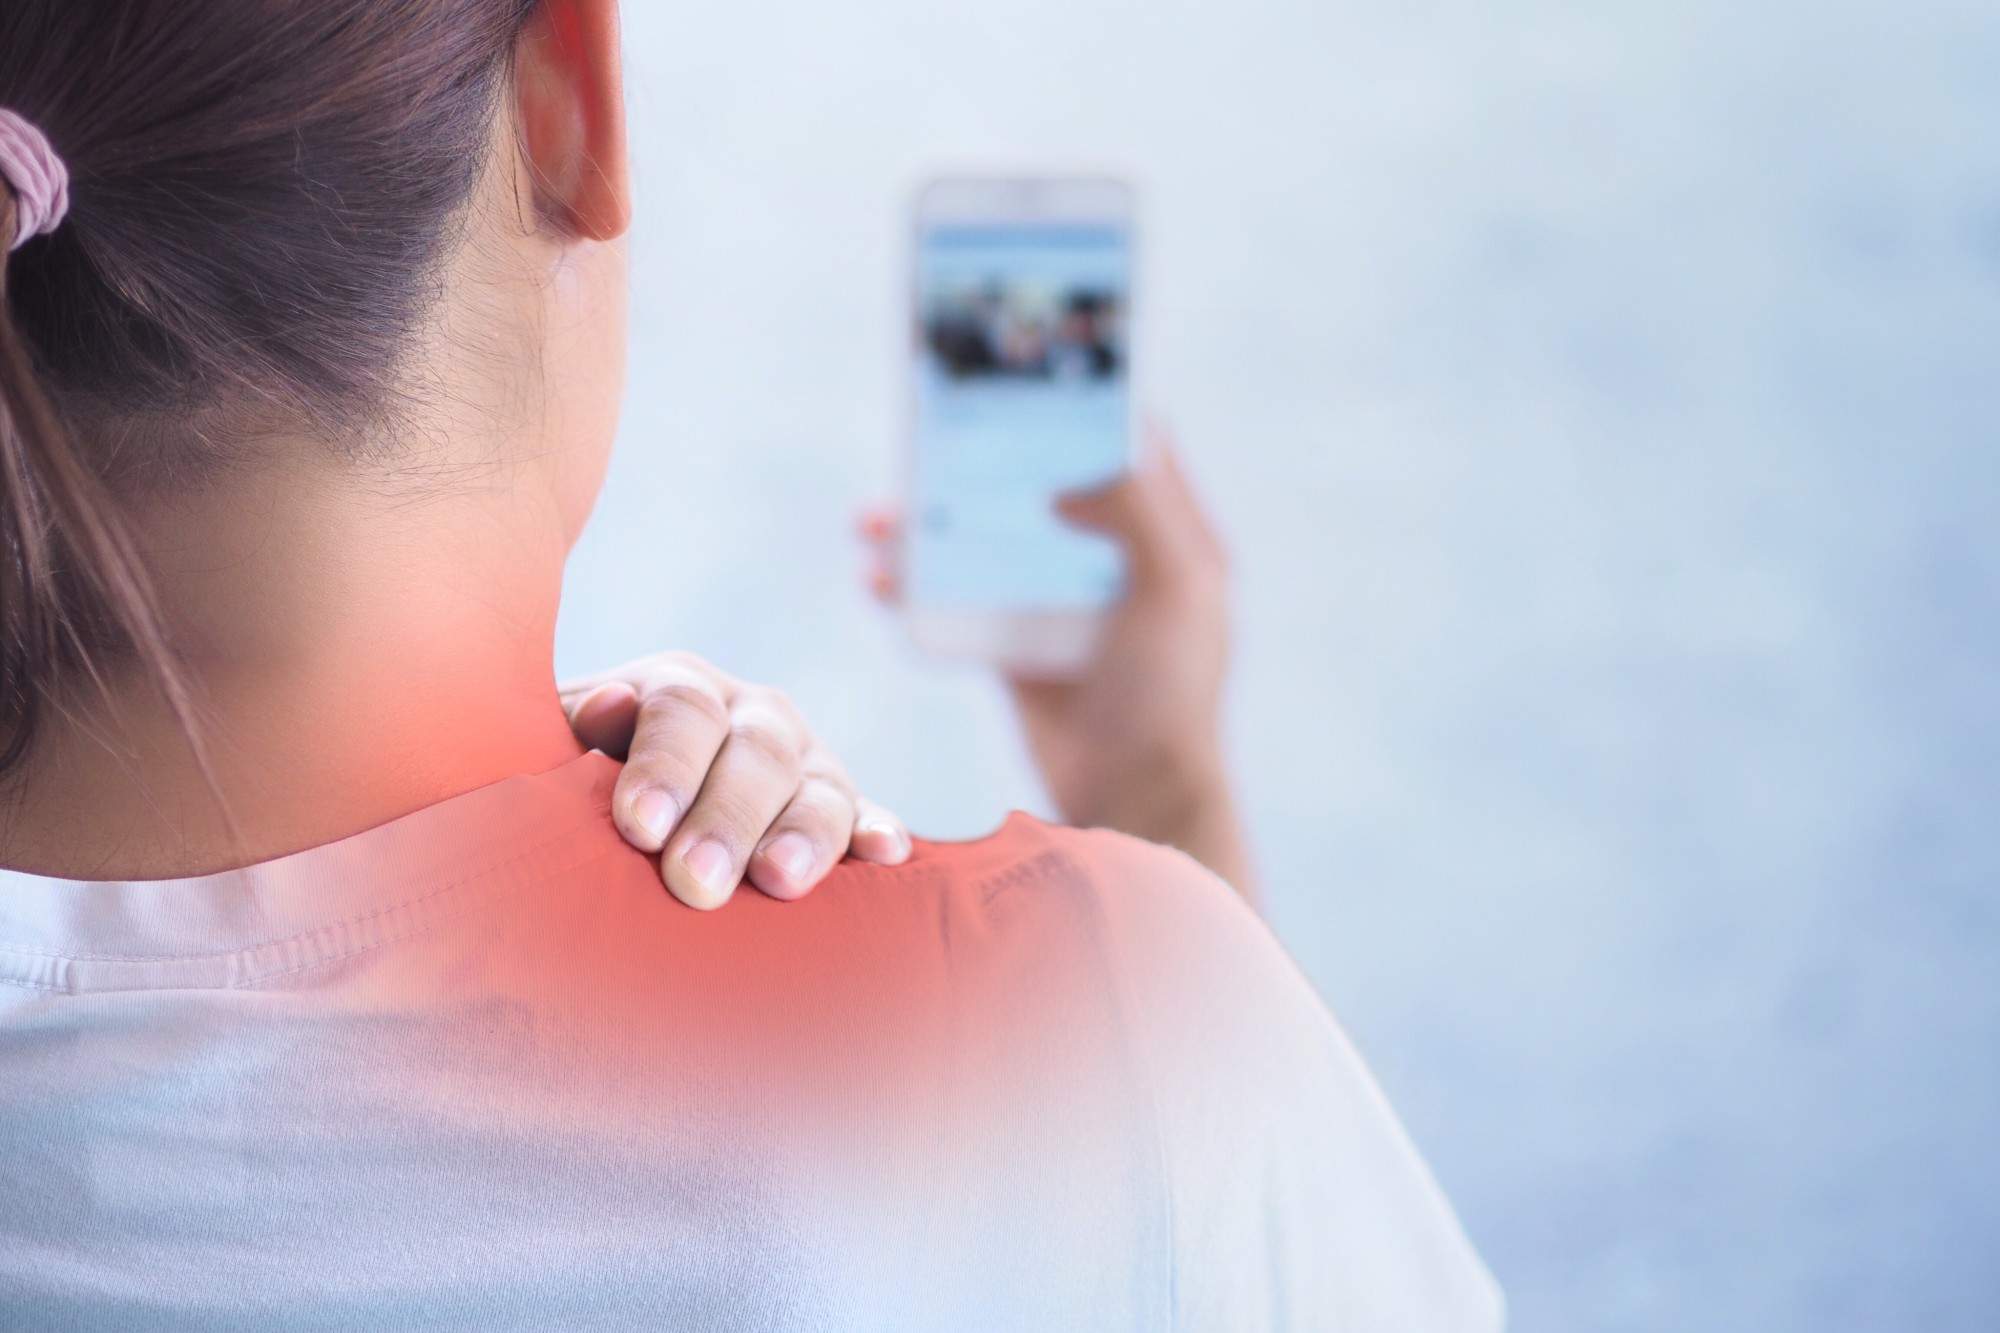 Digital Marketing for Chiropractors: 6 Benefits of an Effective Campaign